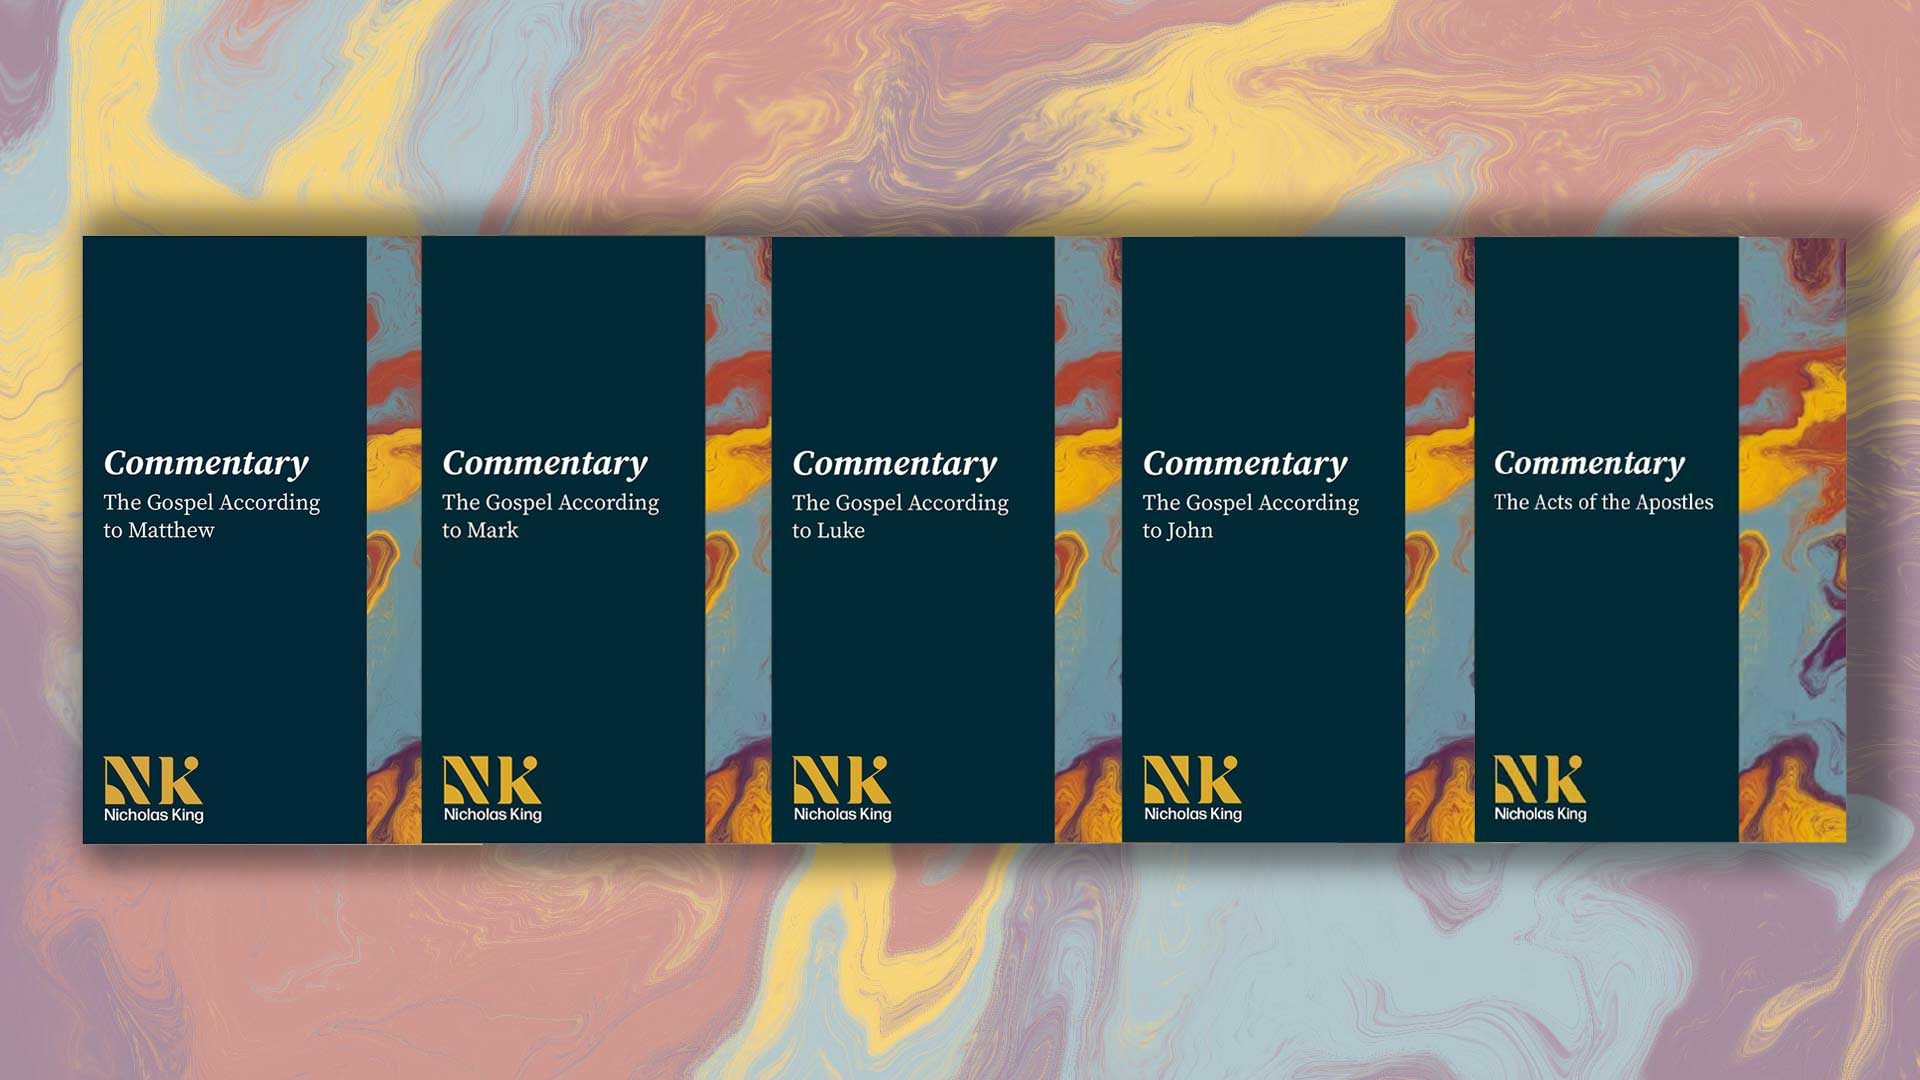 Sample Fr. Nicholas King’s commentaries about the Gospels. Get the gospels and acts for free using code 'NKSample'